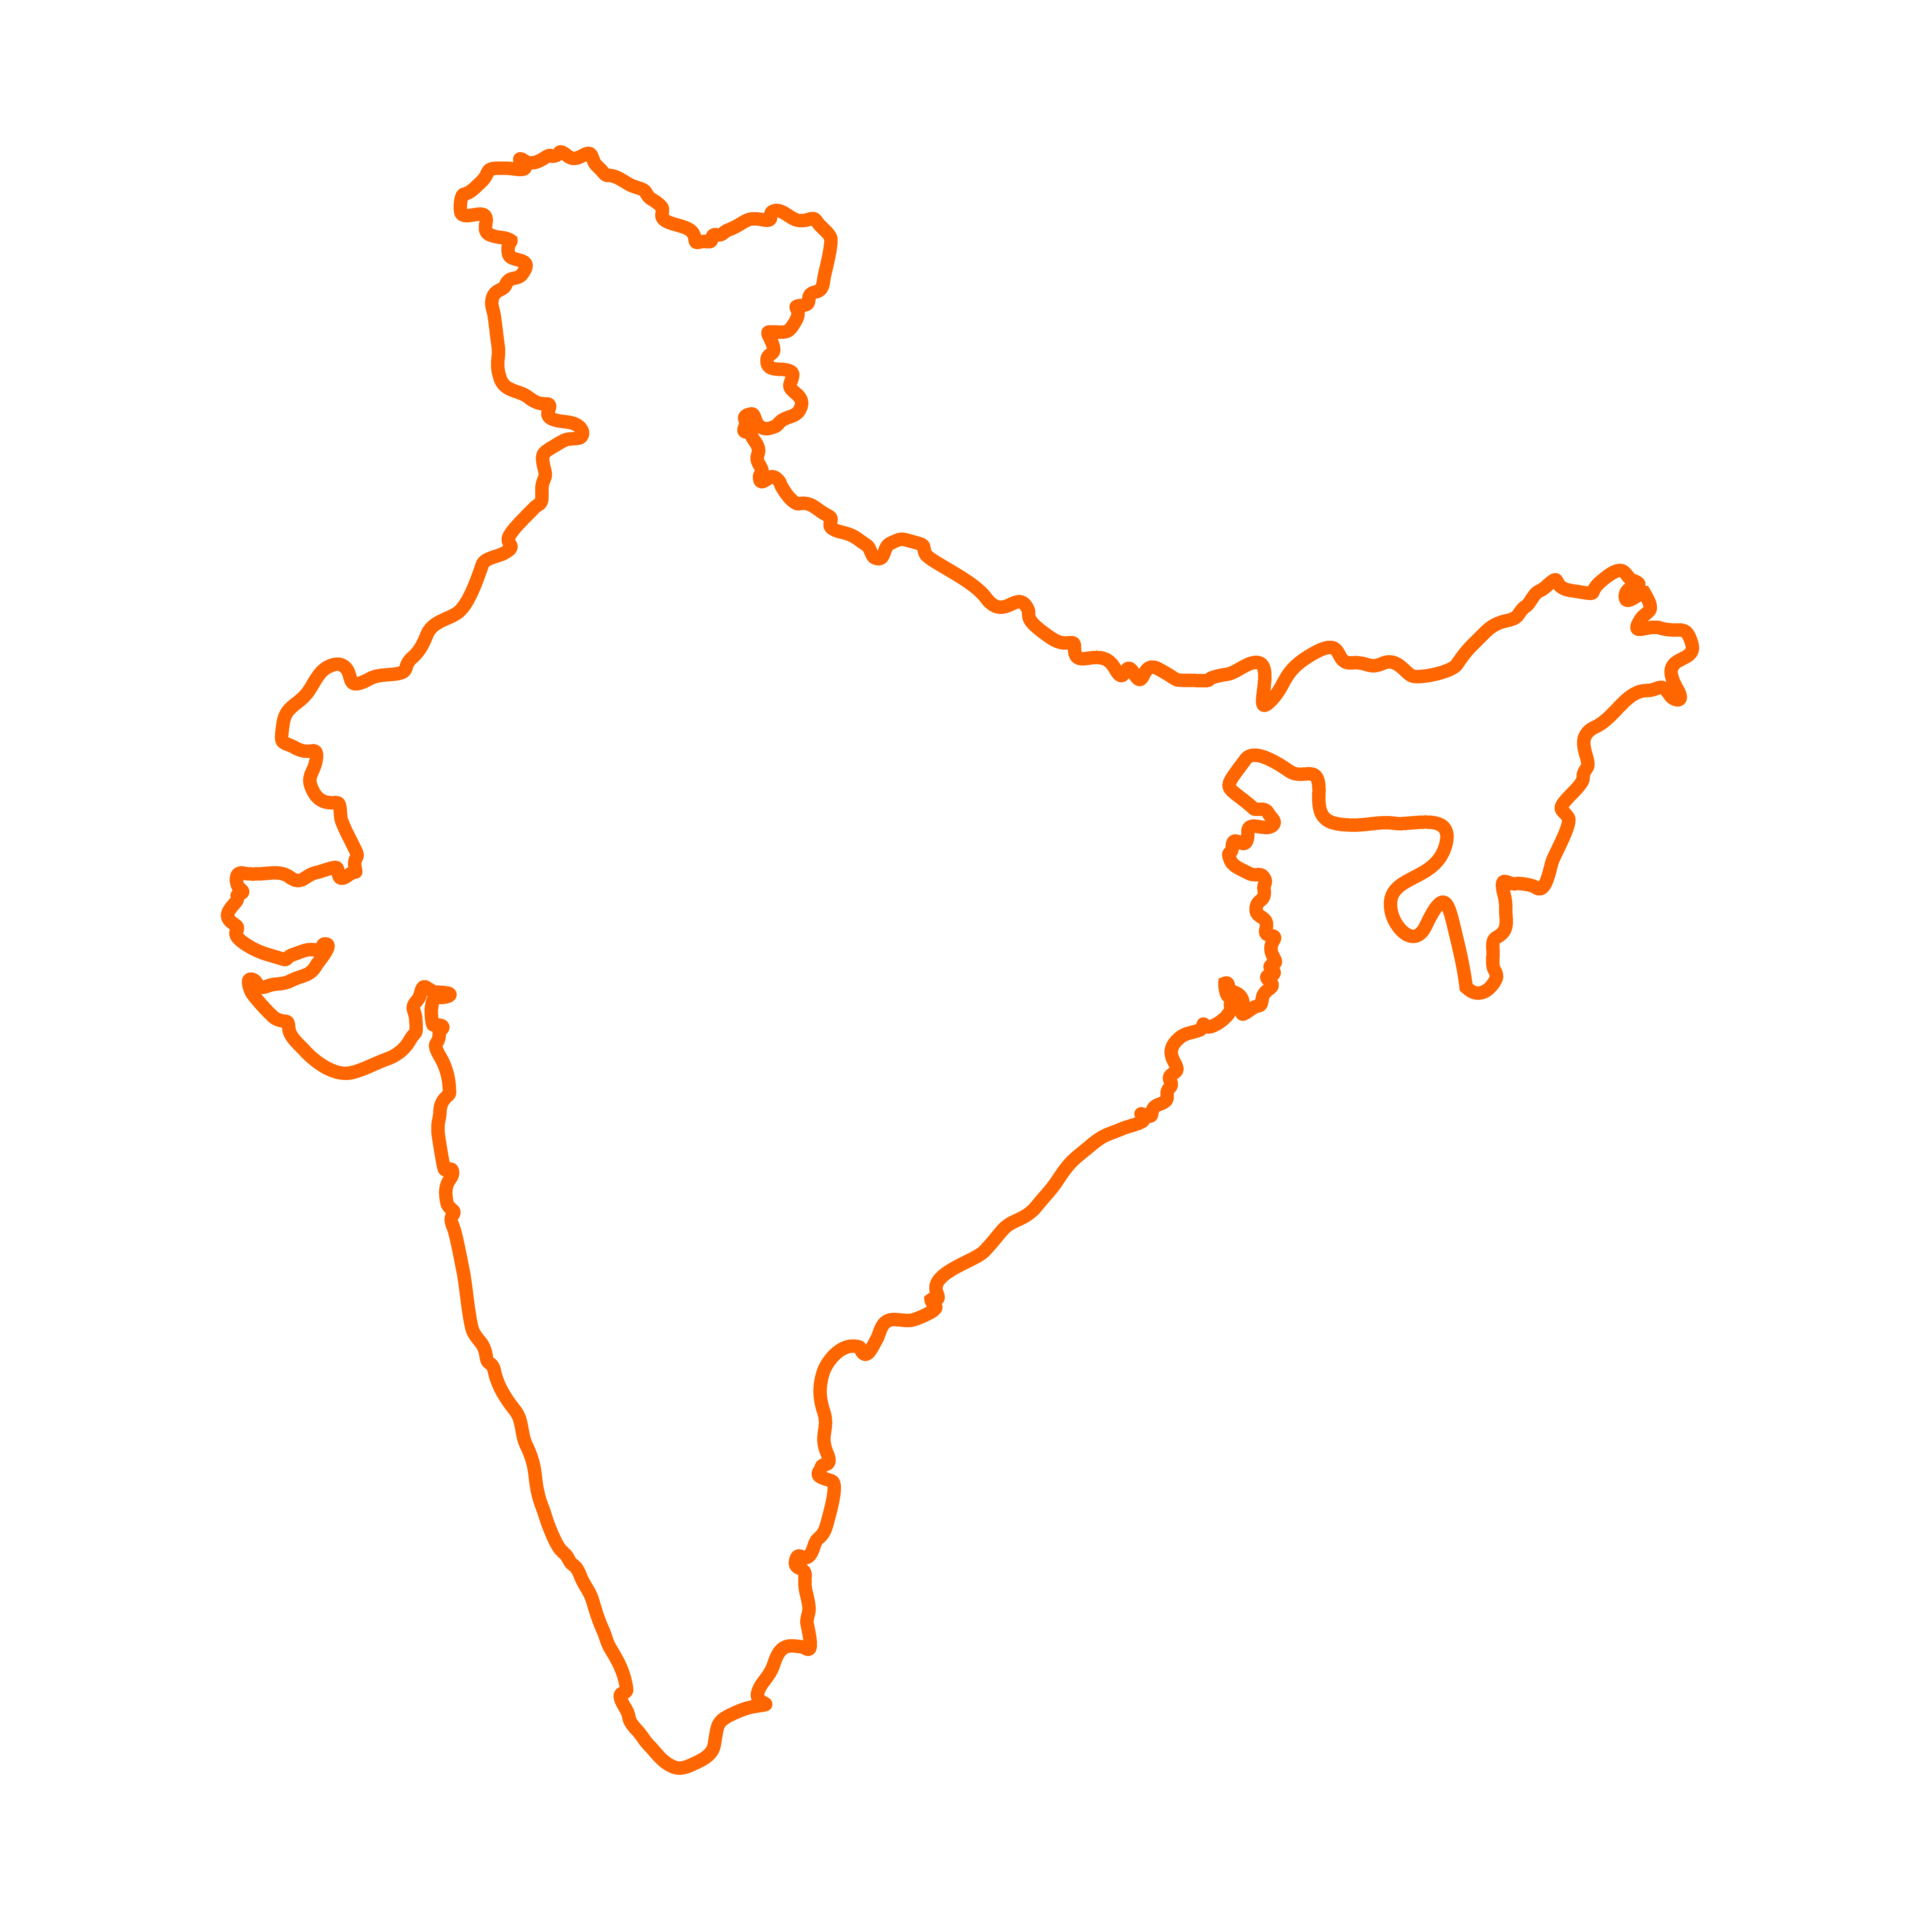 Free India Mapa Contorno Gratis Png 20841016 Png With Transparent